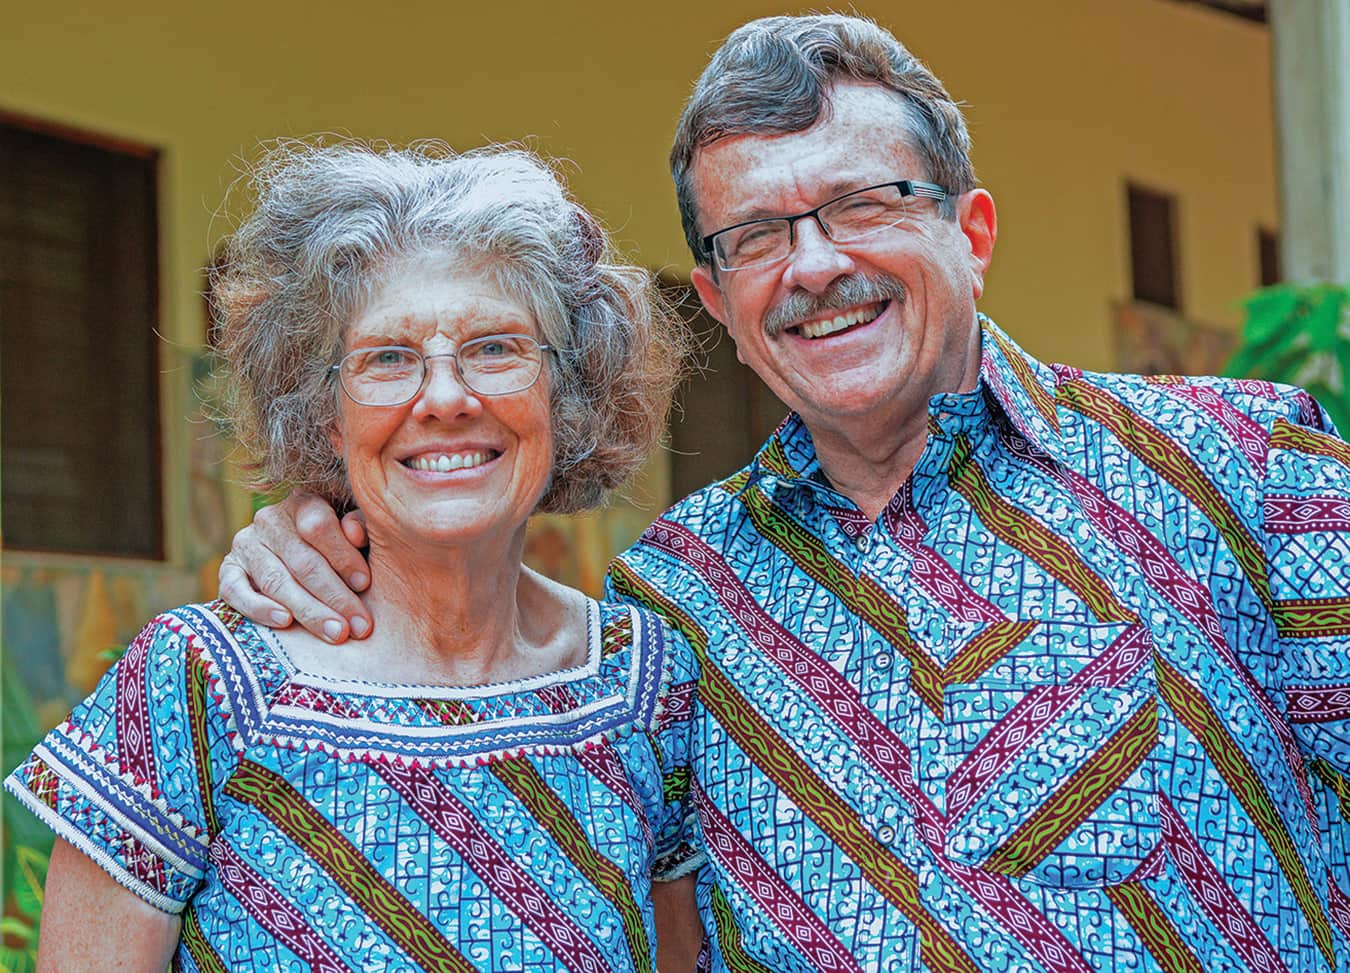 Man and woman smiling in matching colorful shirts.